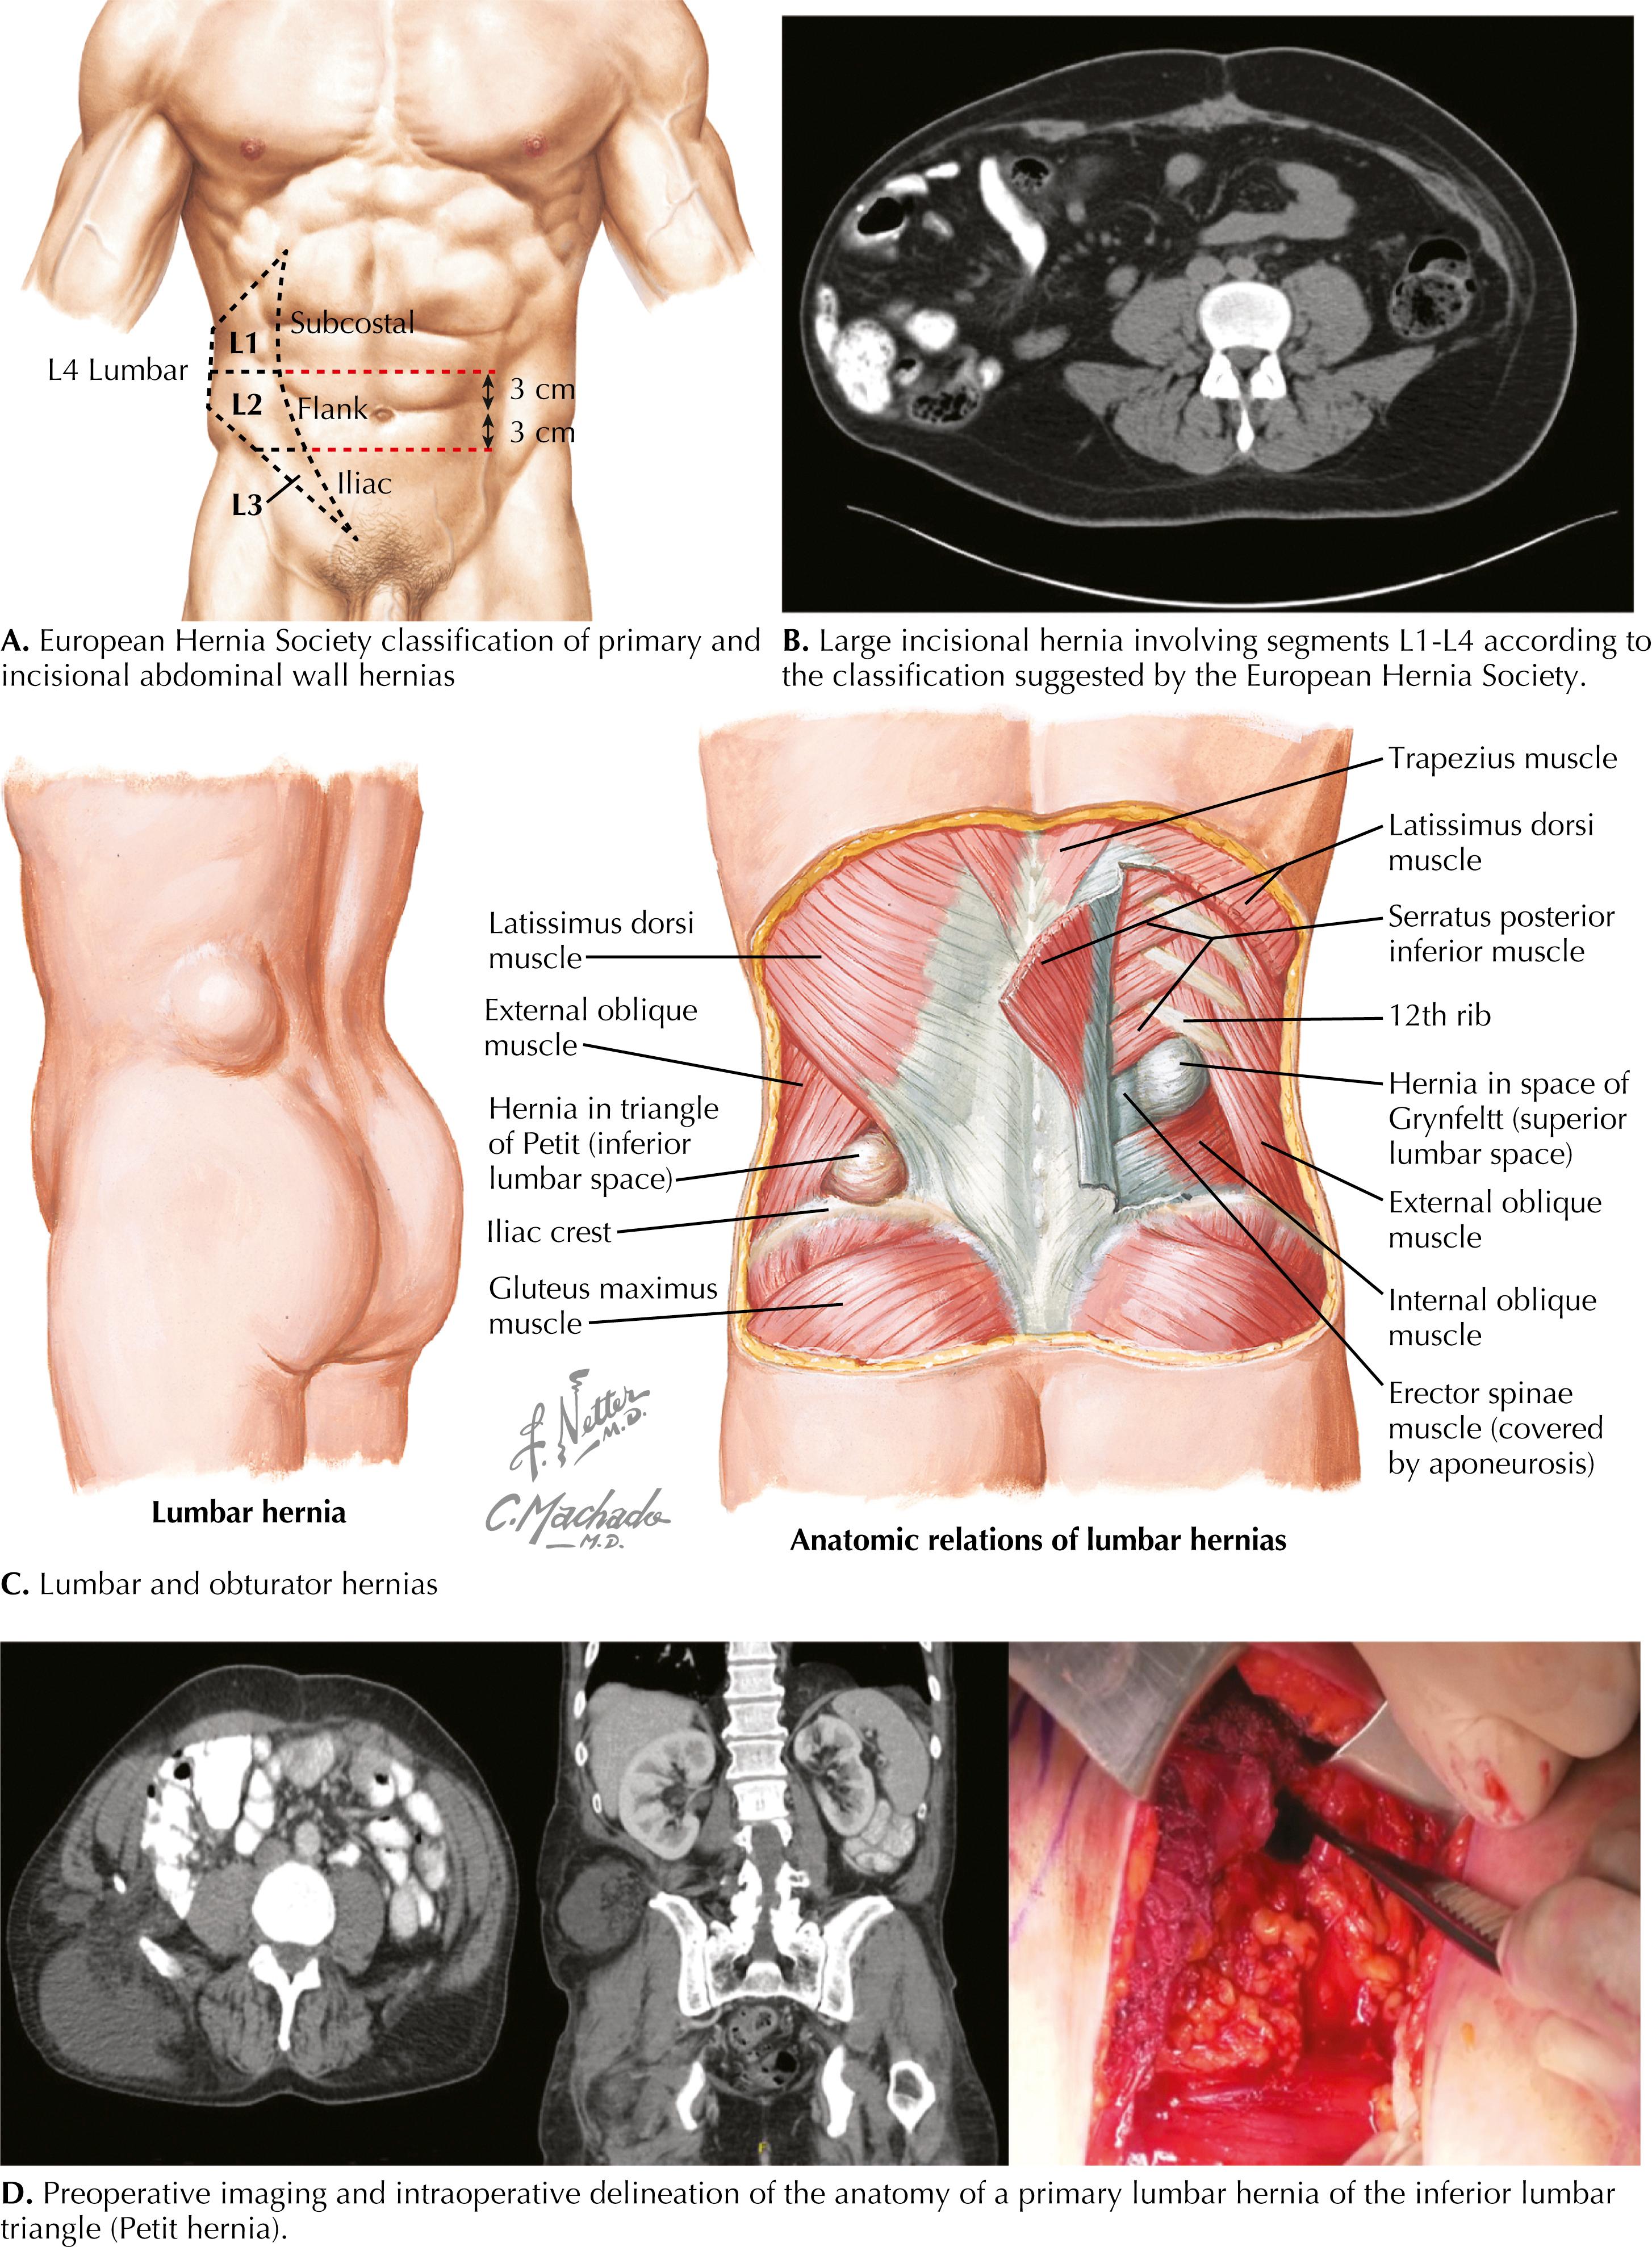 FIGURE 39.1, Anatomy and classifications of flank and lumbar hernias.